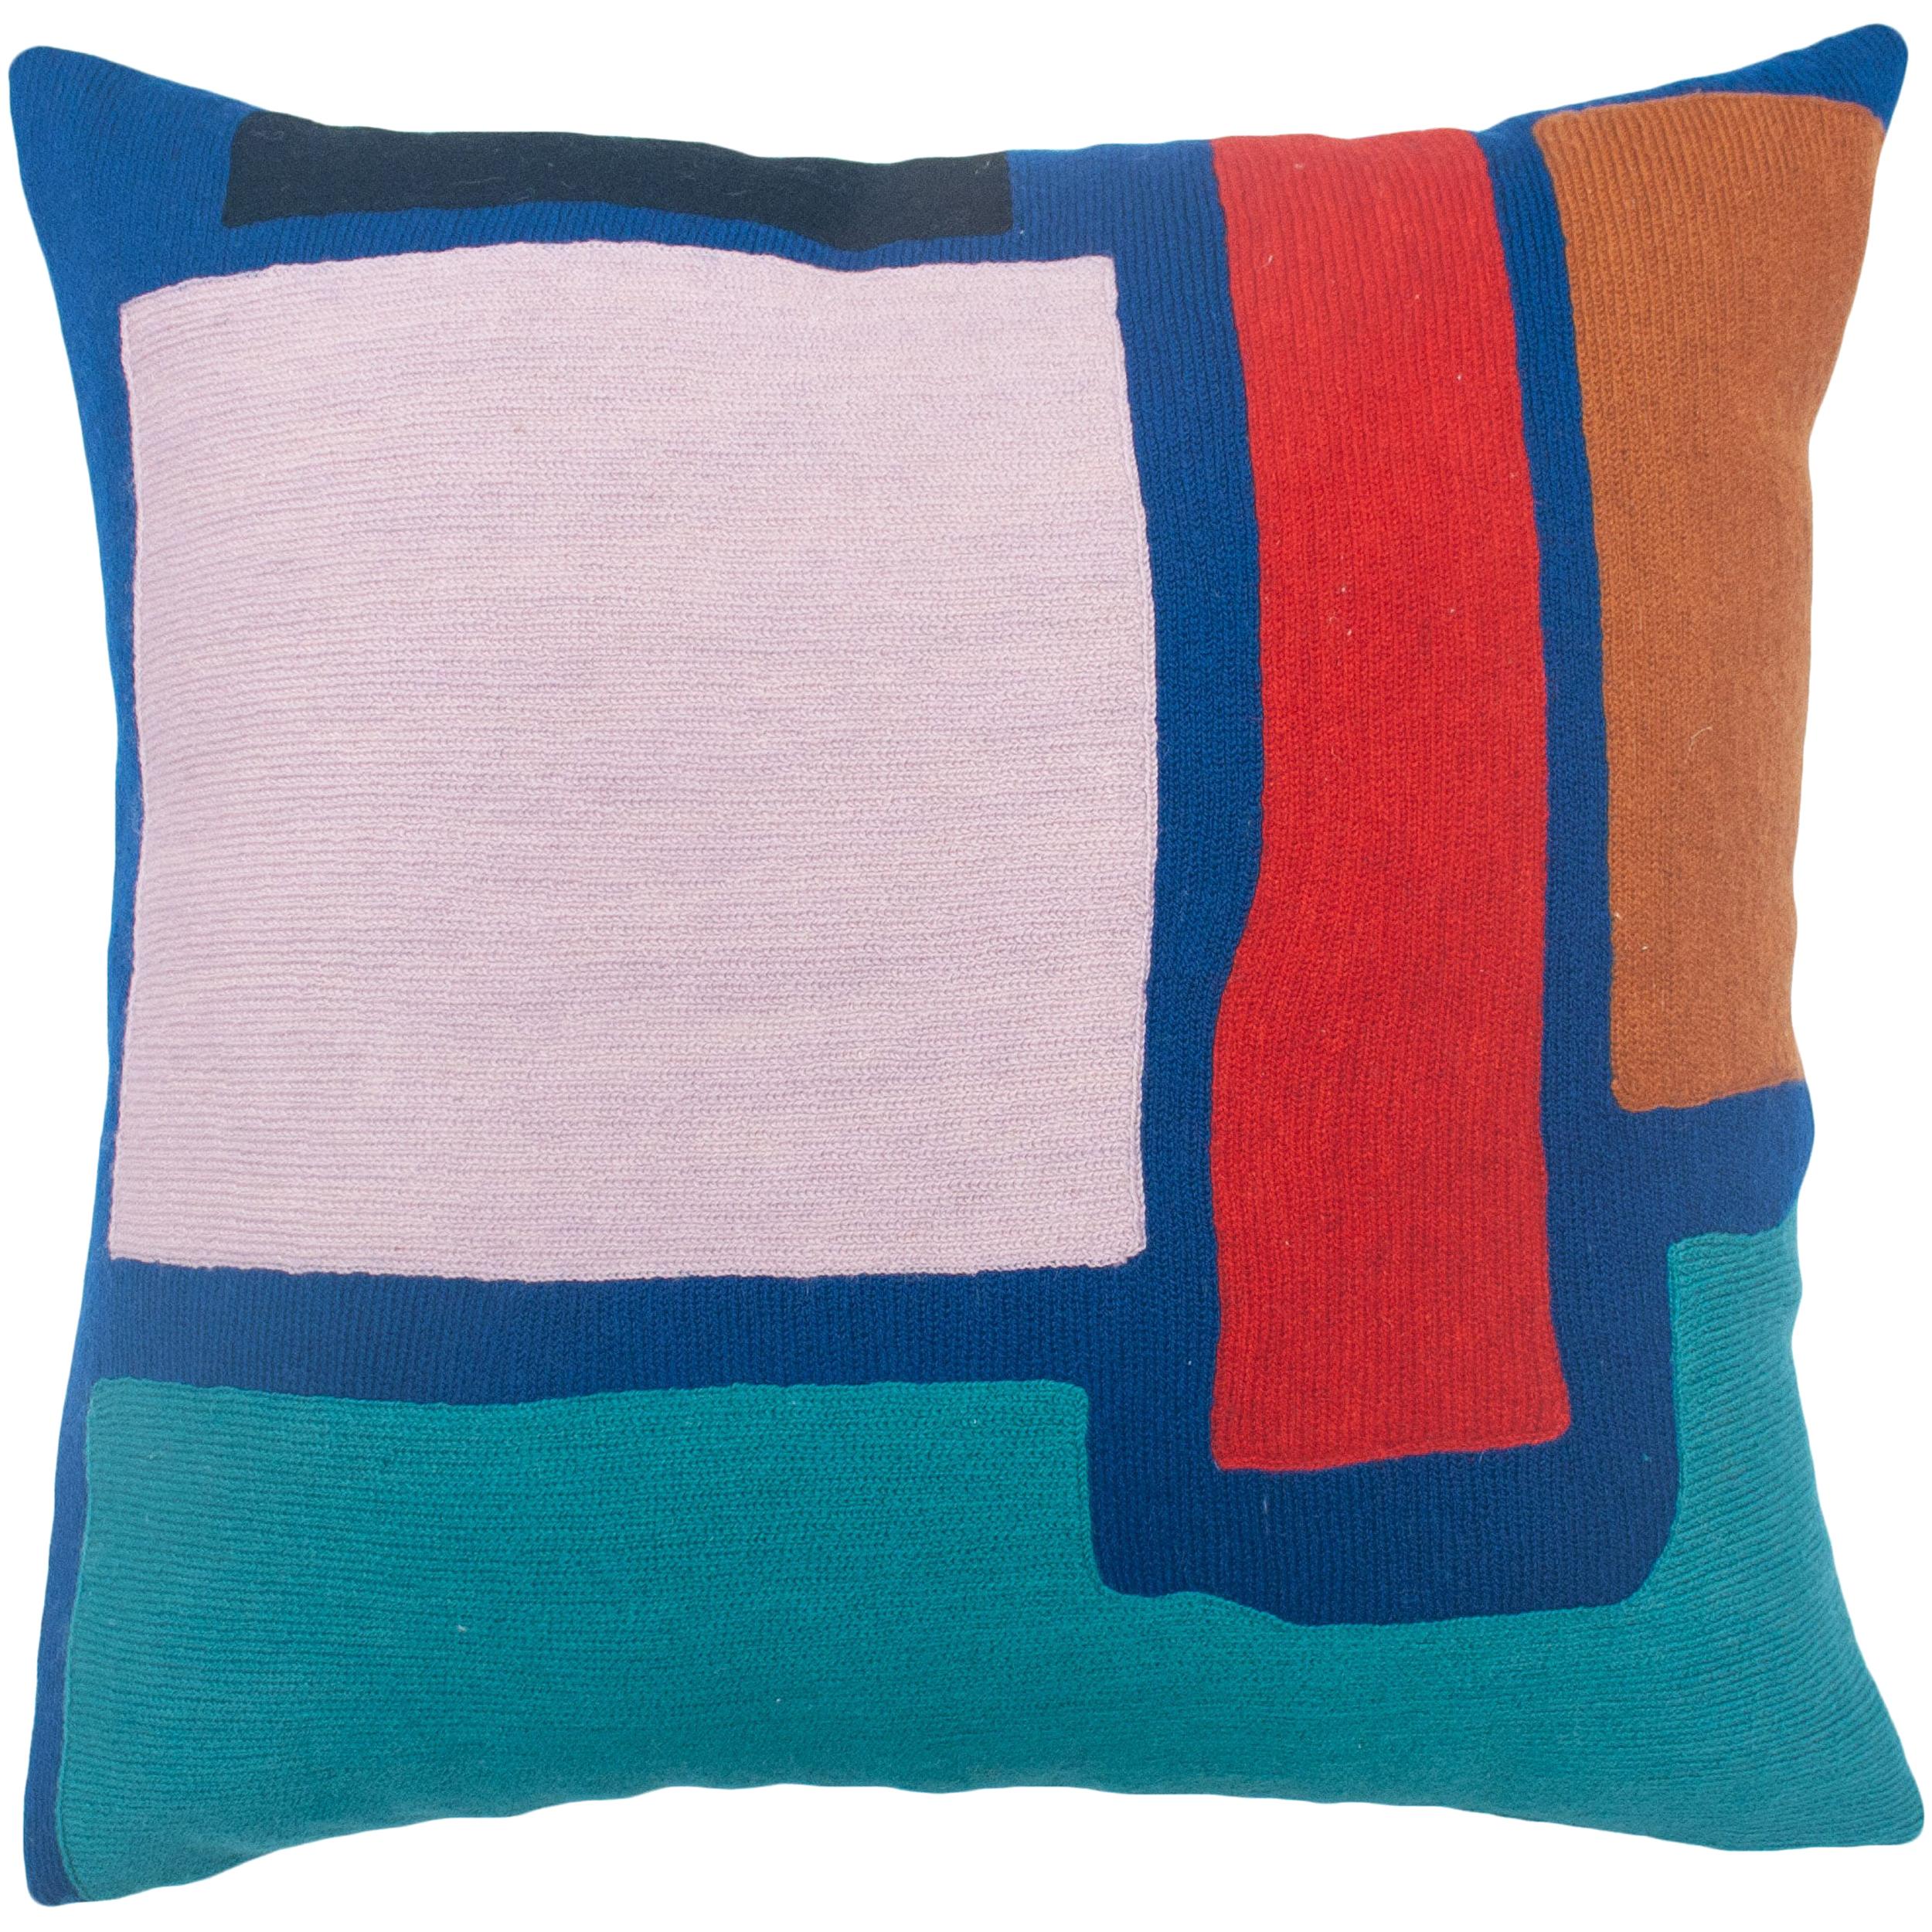 Blah Blah Square Hand Embroidered Modern Geometric Throw Pillow Cover For Sale